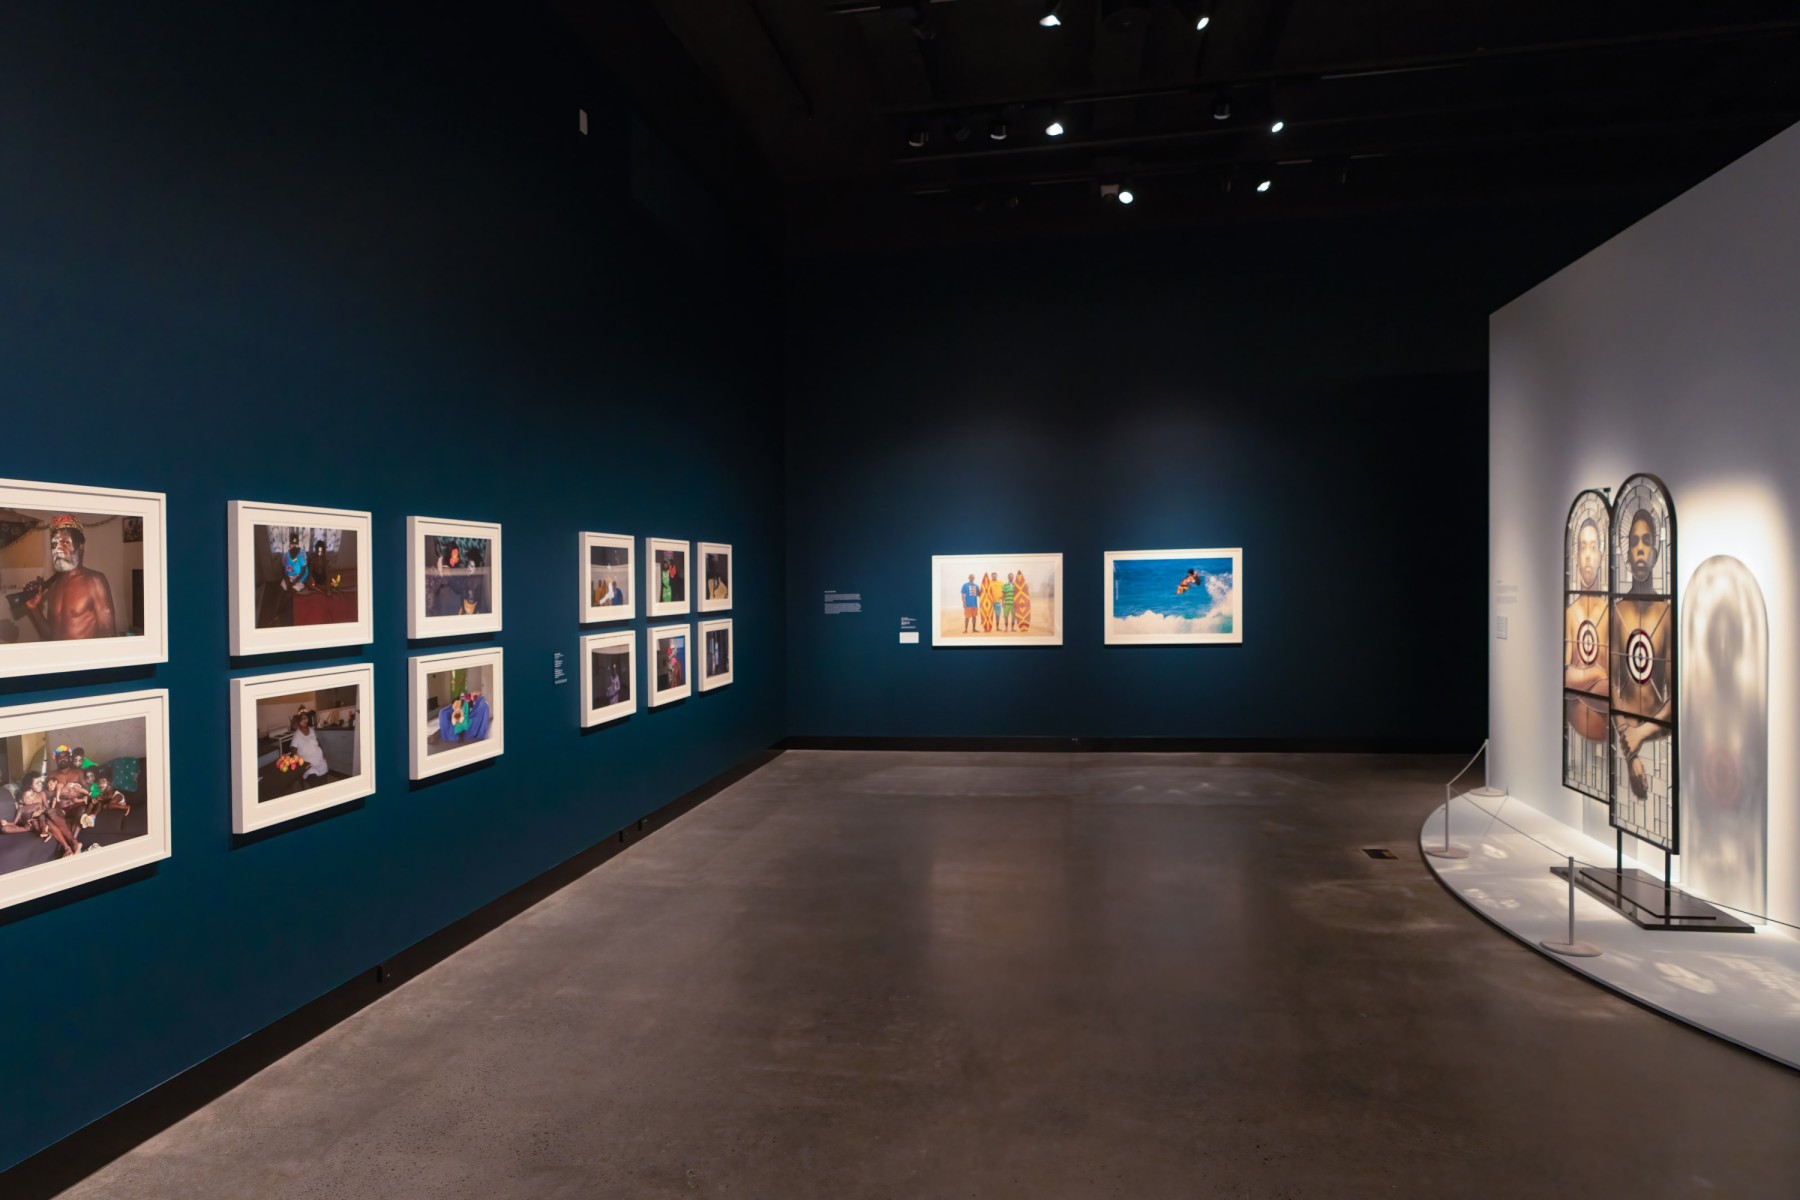 A gallery with darkened blue walls shows three series of photographic portrait works